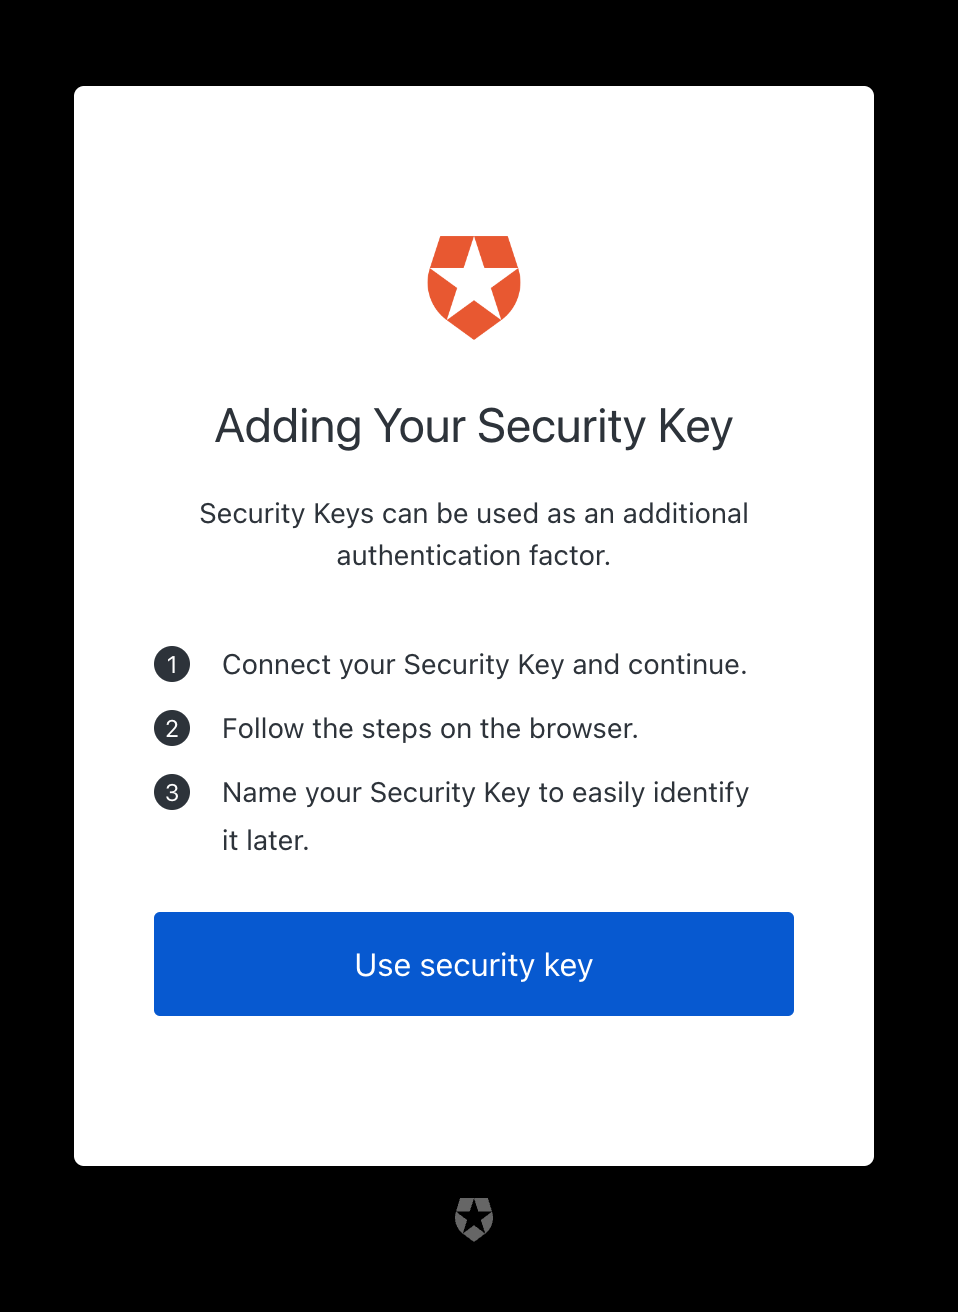 Add your Security Key